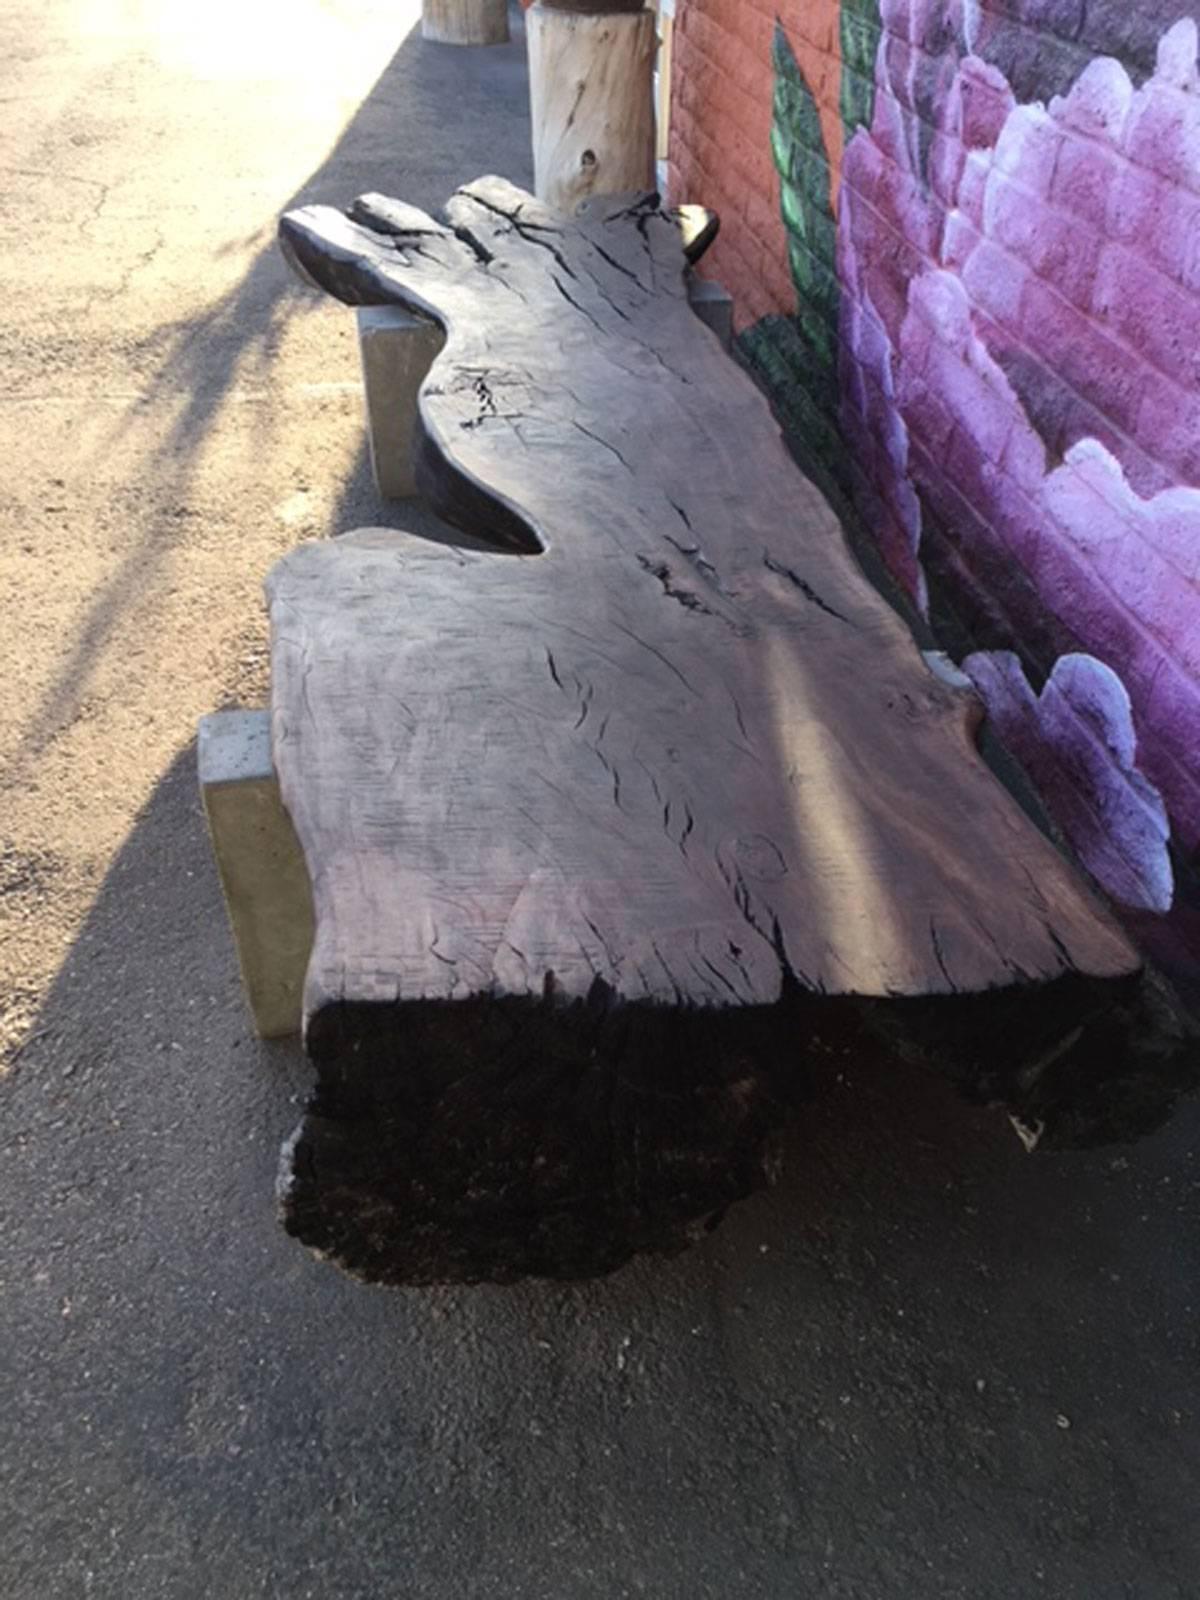 Huge organic eucalyptus wood and concrete bench or seating platform designed, produced and made by master wood artist and designer Scott Mills who only uses reclaimed (deadfall or storm downed trees) in the pieces he designs and produces. This piece